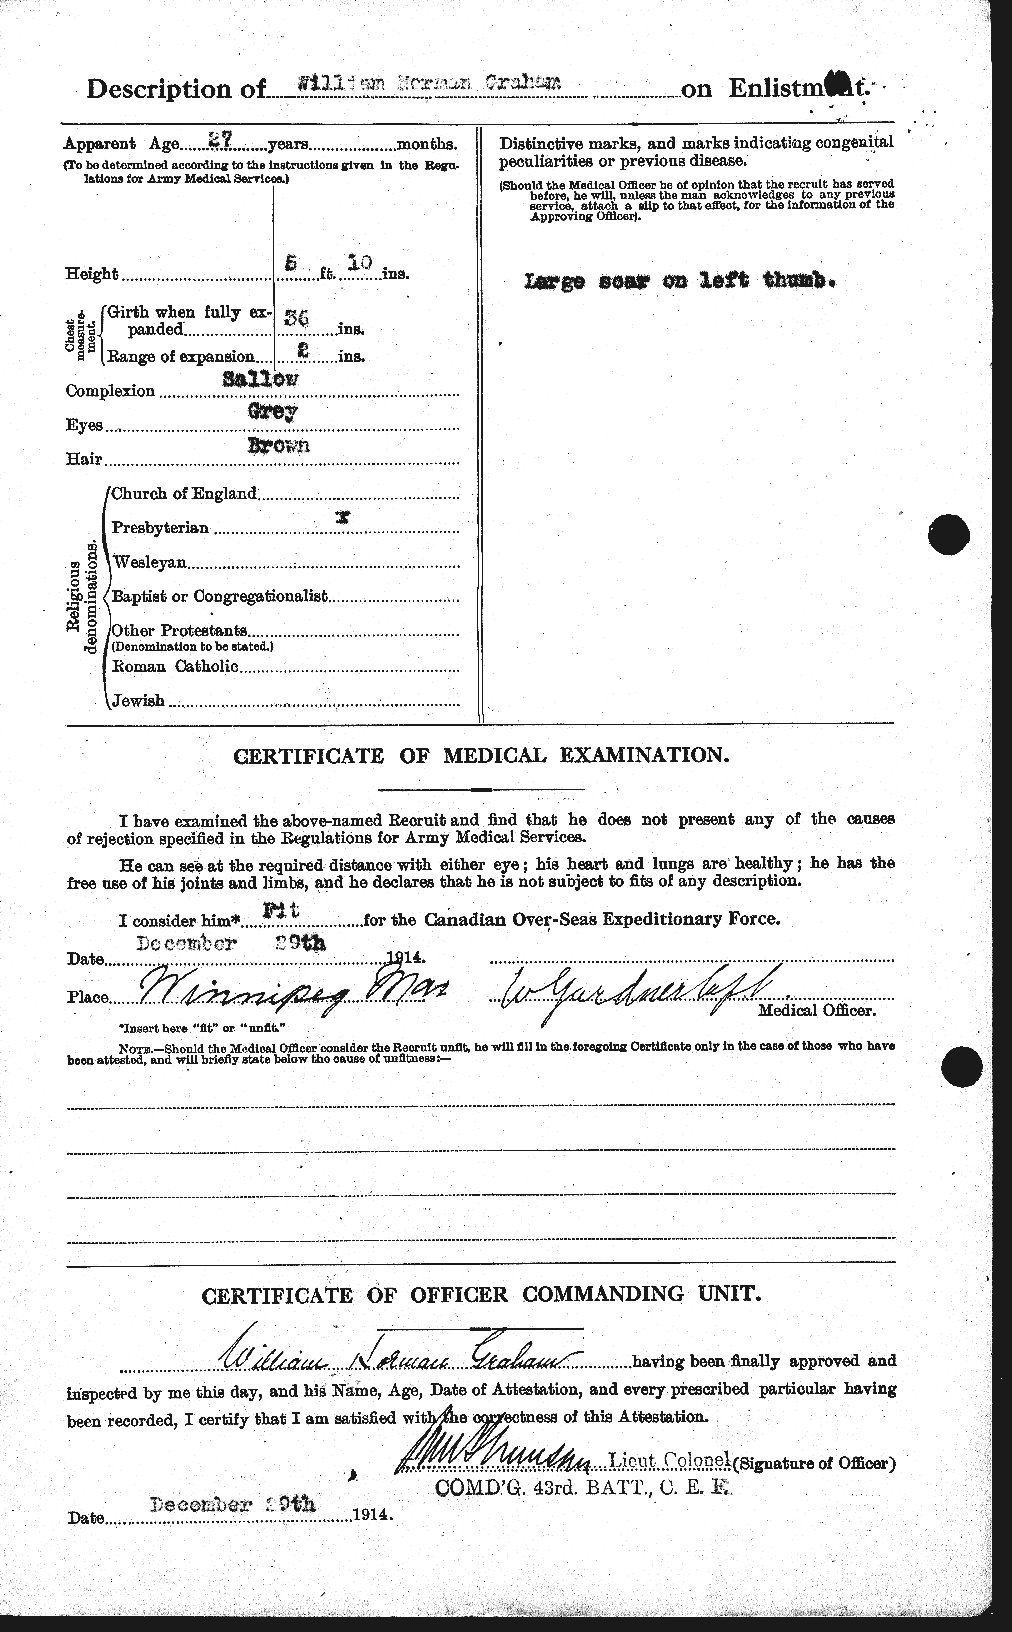 Personnel Records of the First World War - CEF 358028b